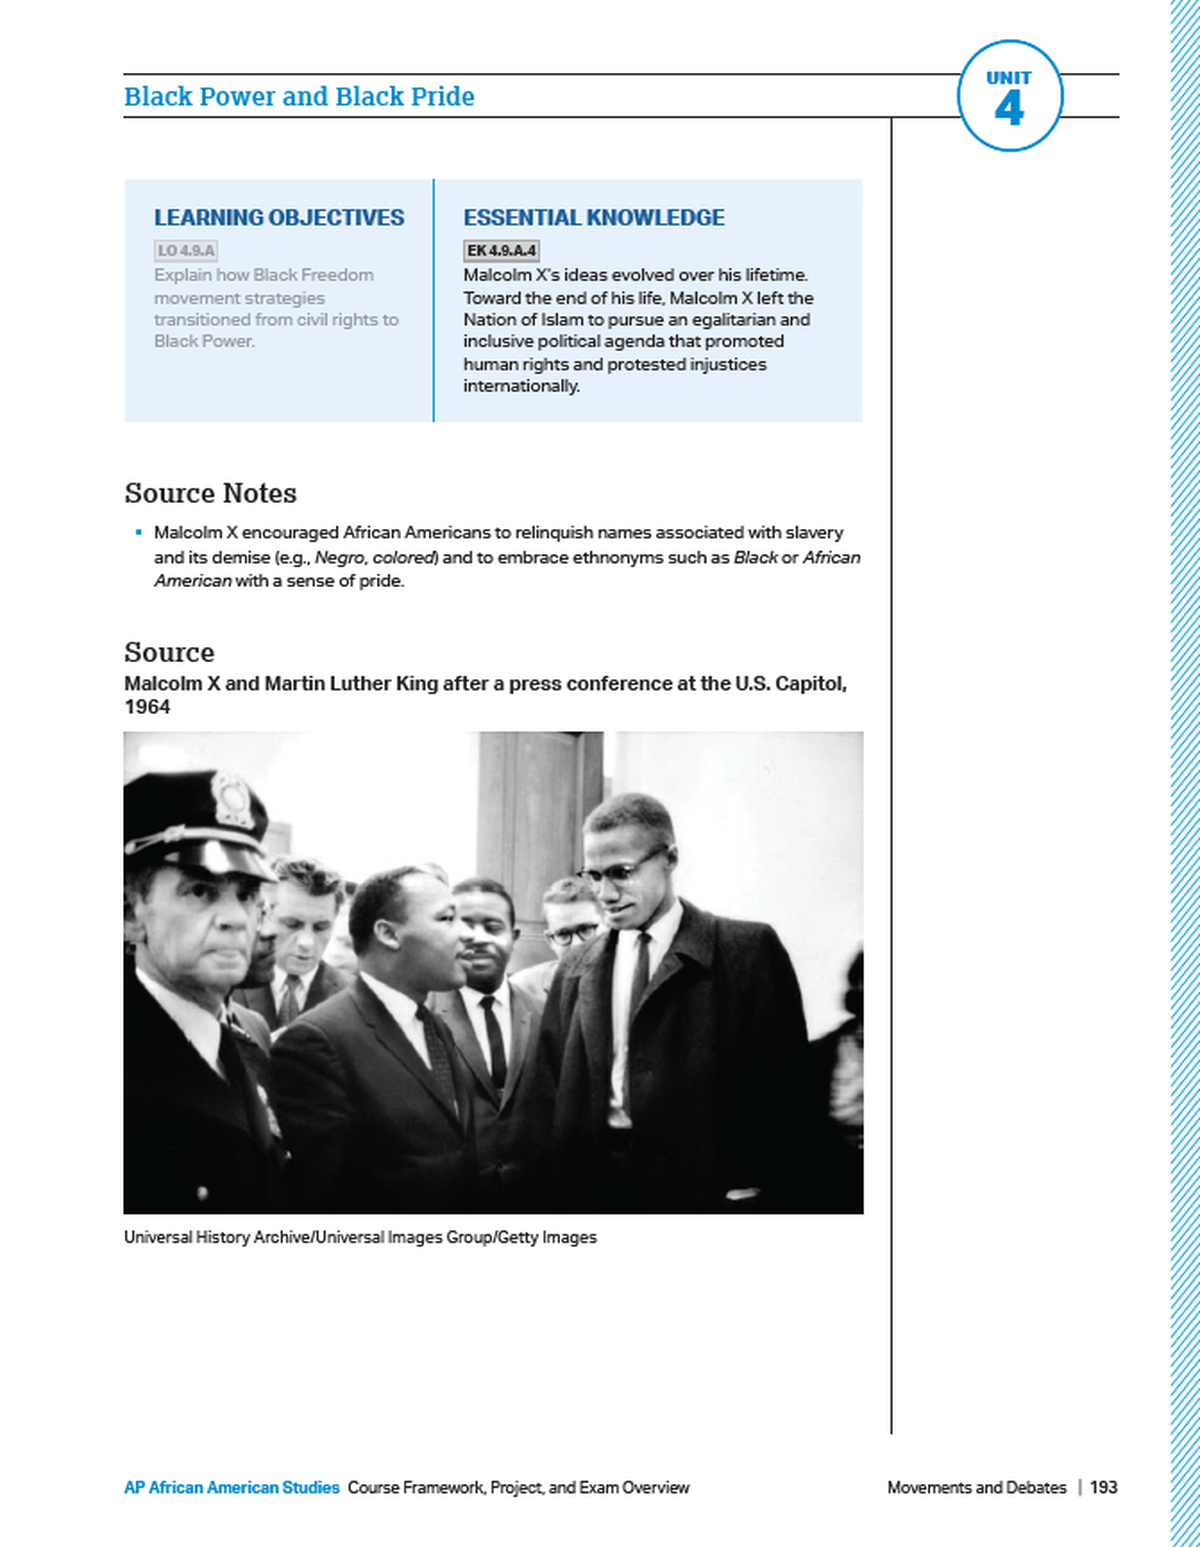 A sample page of the framework for the AP African American Studies course looks at the Black Power movement in connection with the fight for civil rights in the 1950s and 1960s.  (College Board)